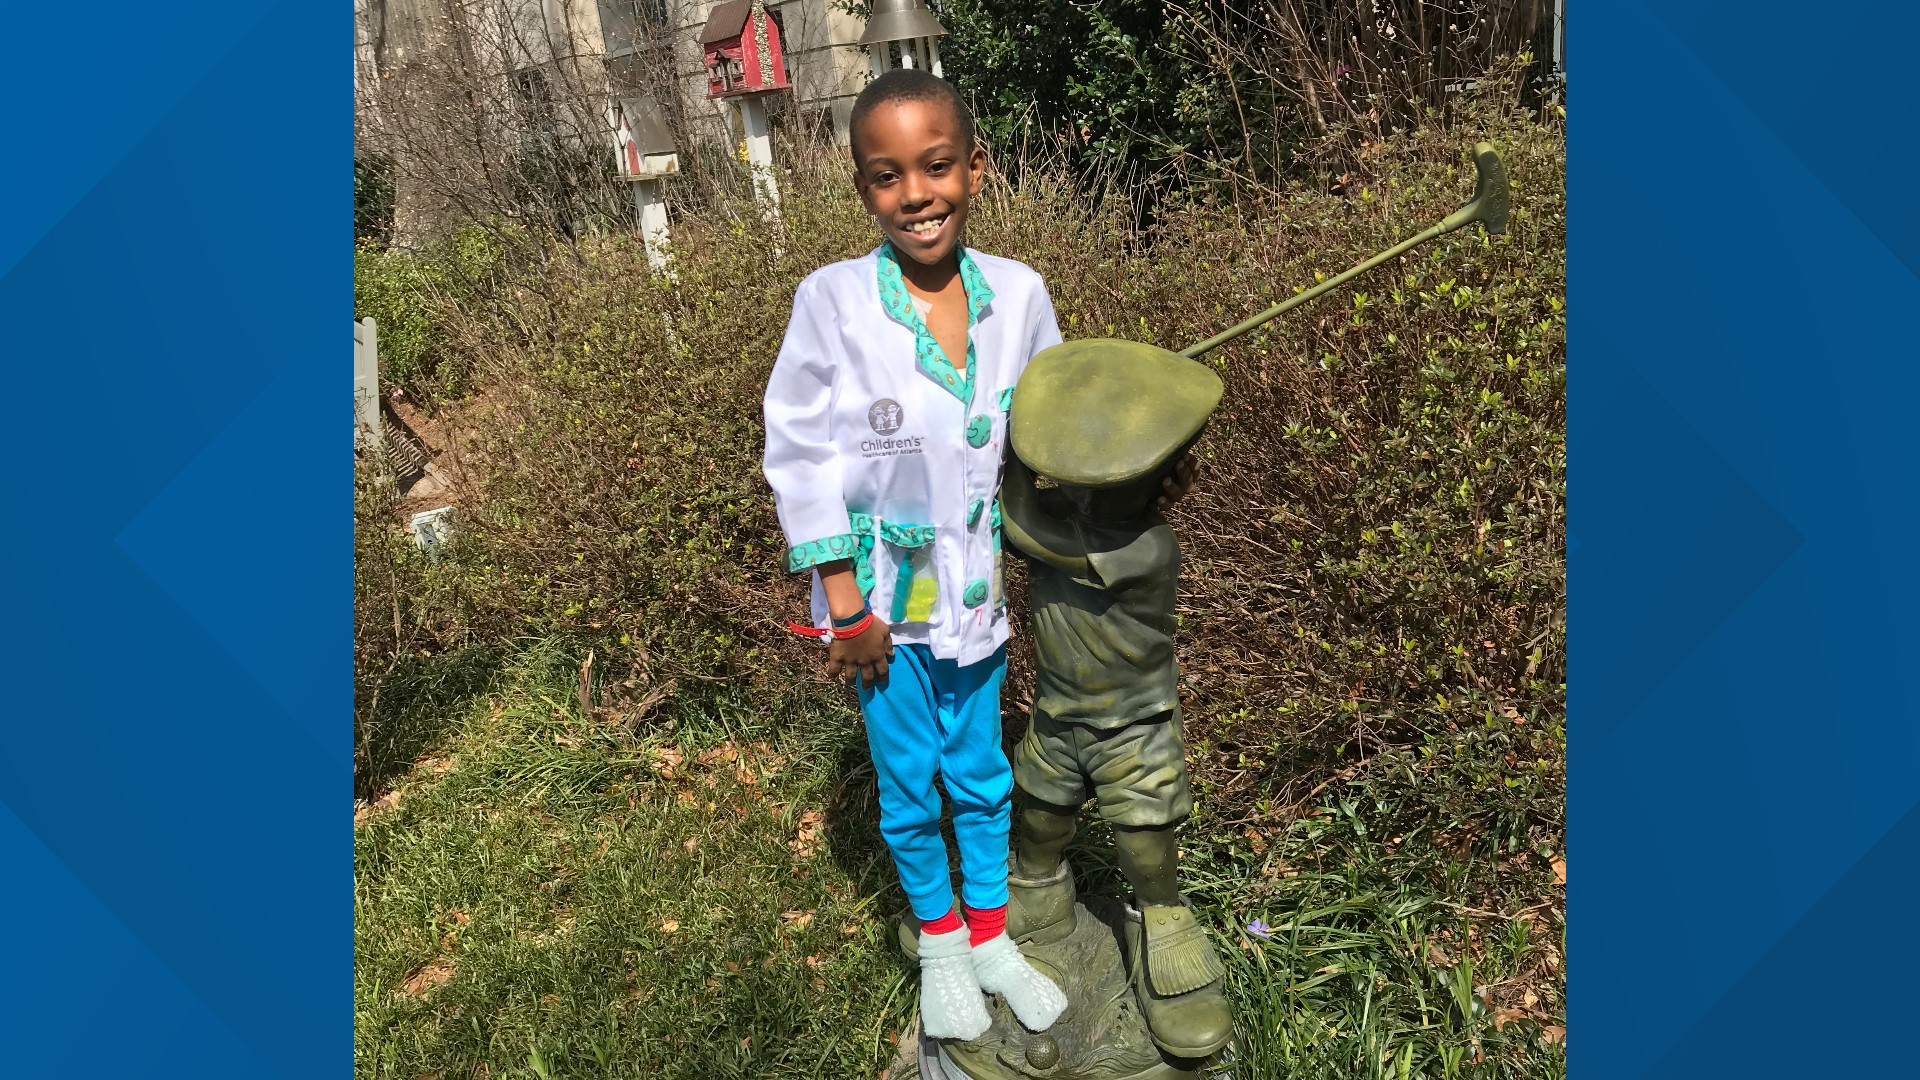 11-year-old William Stowers is fighting stage 4 liver cancer. His family hopes the new treatment at Children’s Healthcare of Atlanta will make a difference.